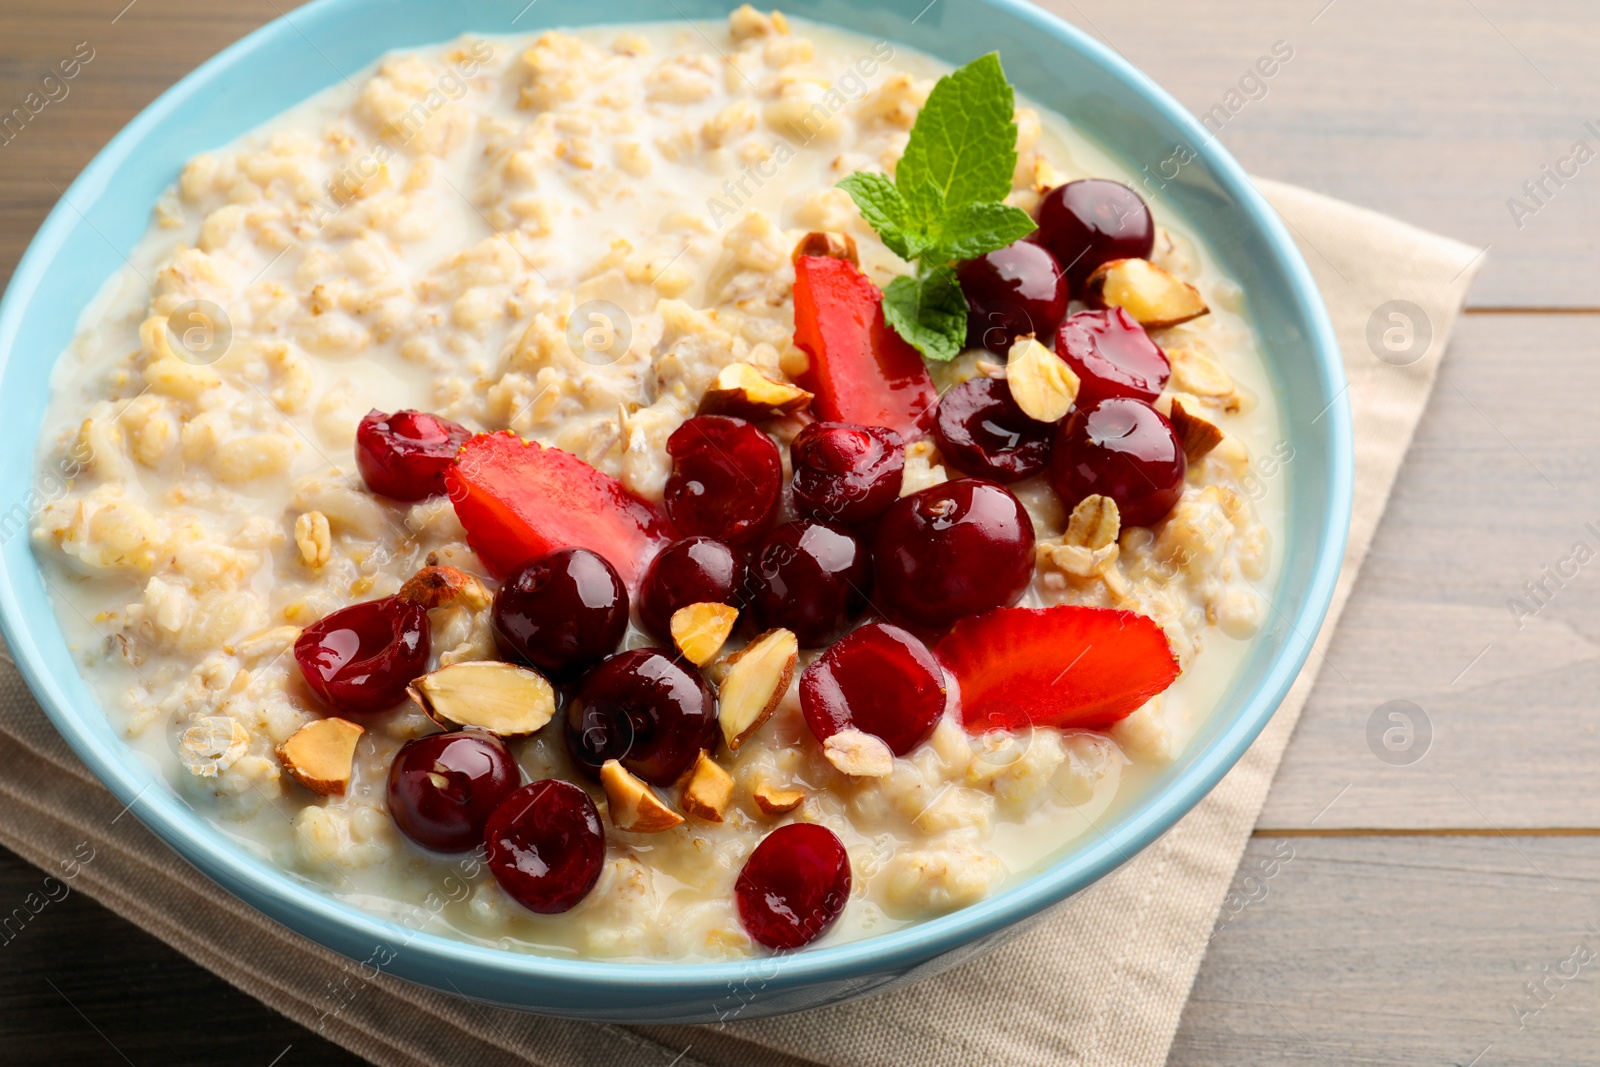 Photo of Bowl of oatmeal porridge served with berries on wooden table, closeup